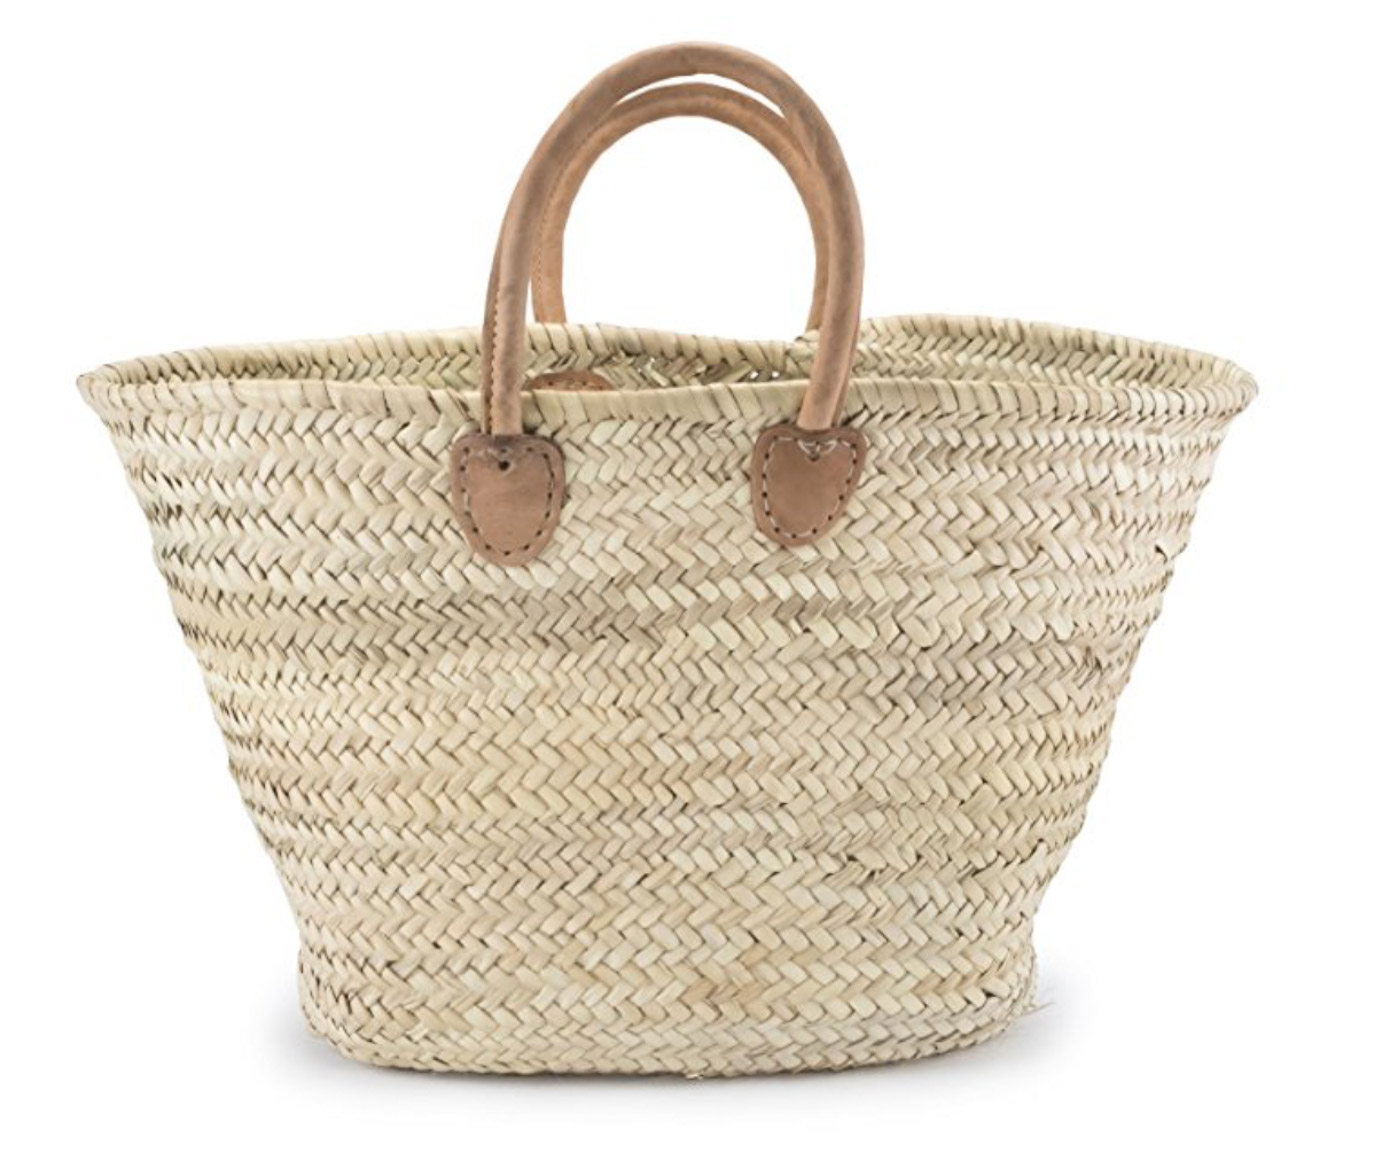 Laura Leigh of Louella Reese shares her favorite summer purchases of summer 2018 including the BEST Straw Tote